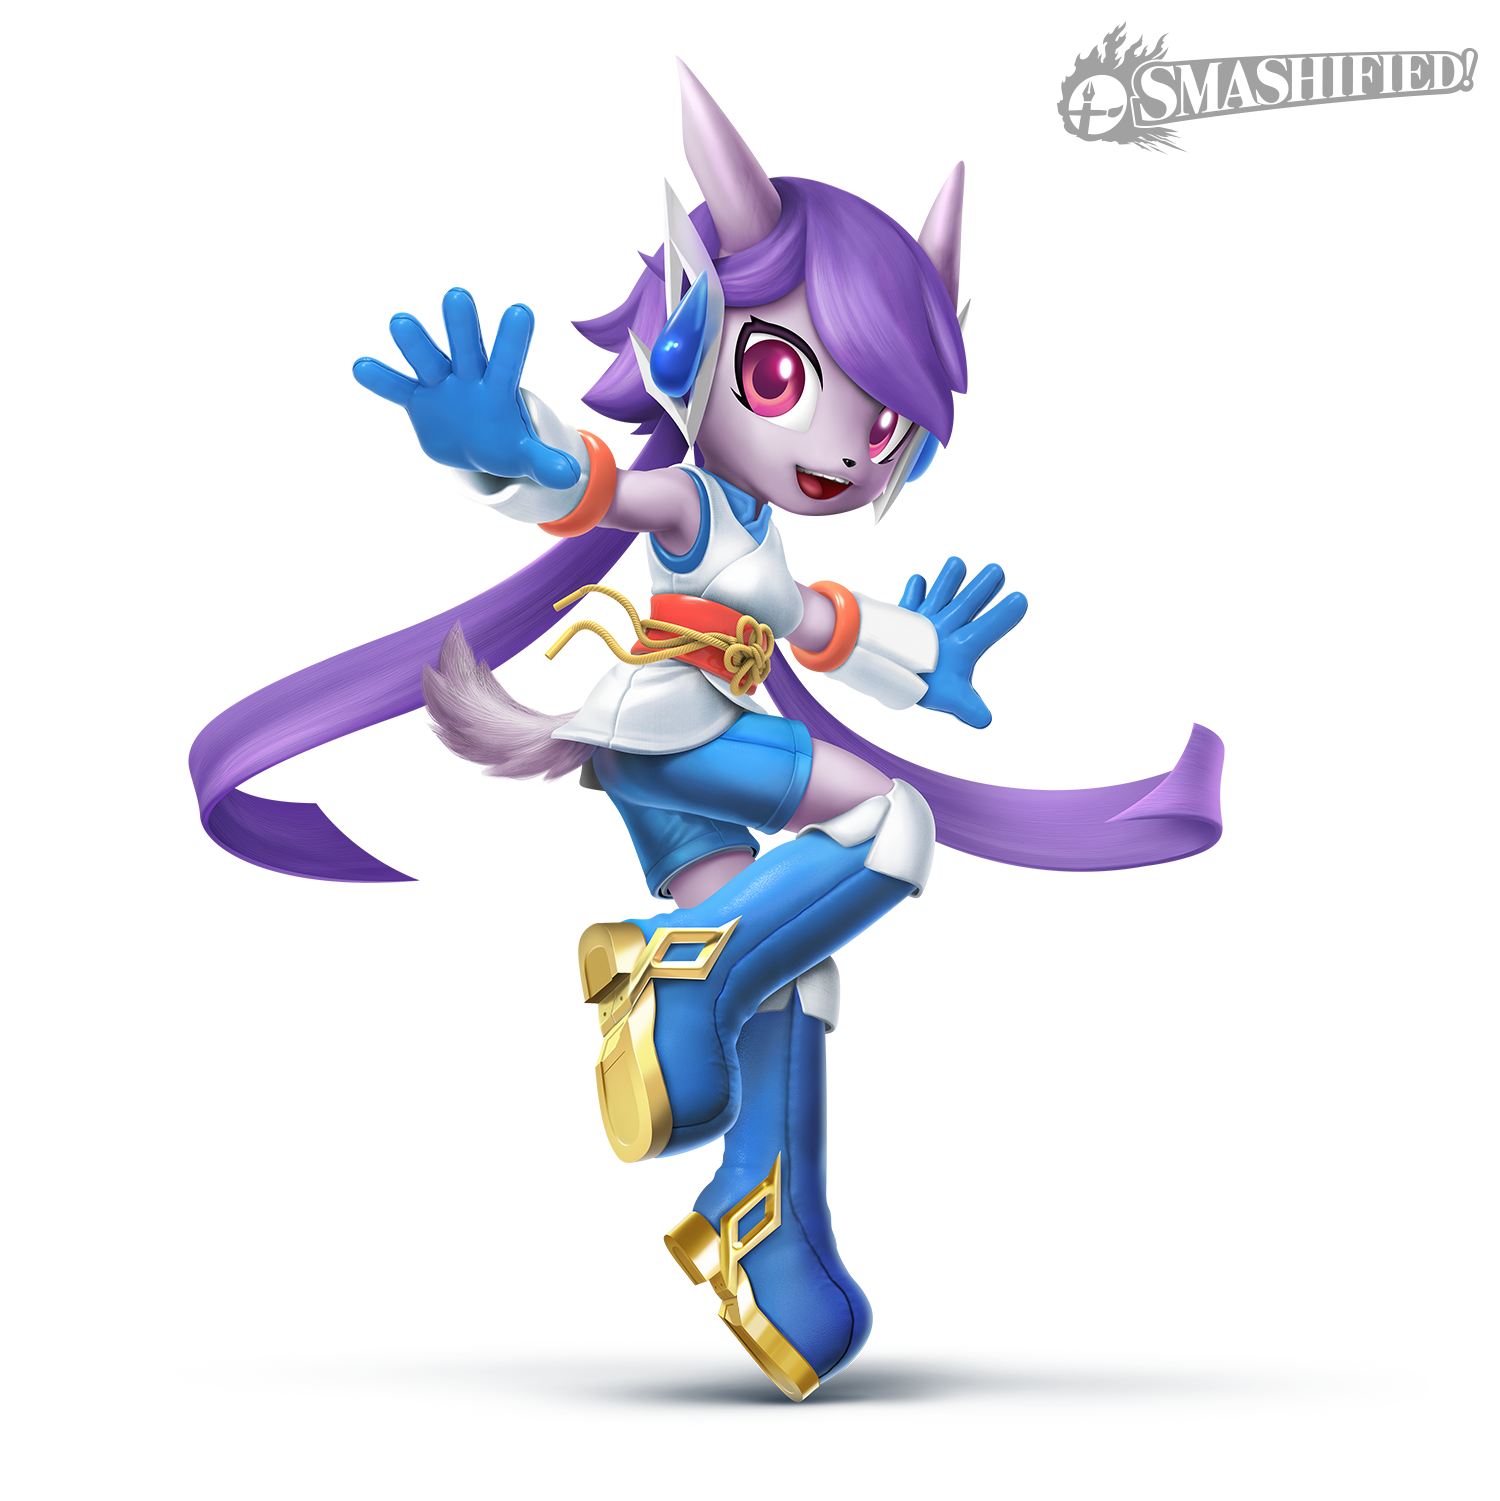 Sash Lilac (Freedom Planet) Discussion: Cyclone into the Action Lilac_smashified_transparent_by_hextupleyoodot-d9q5ebw